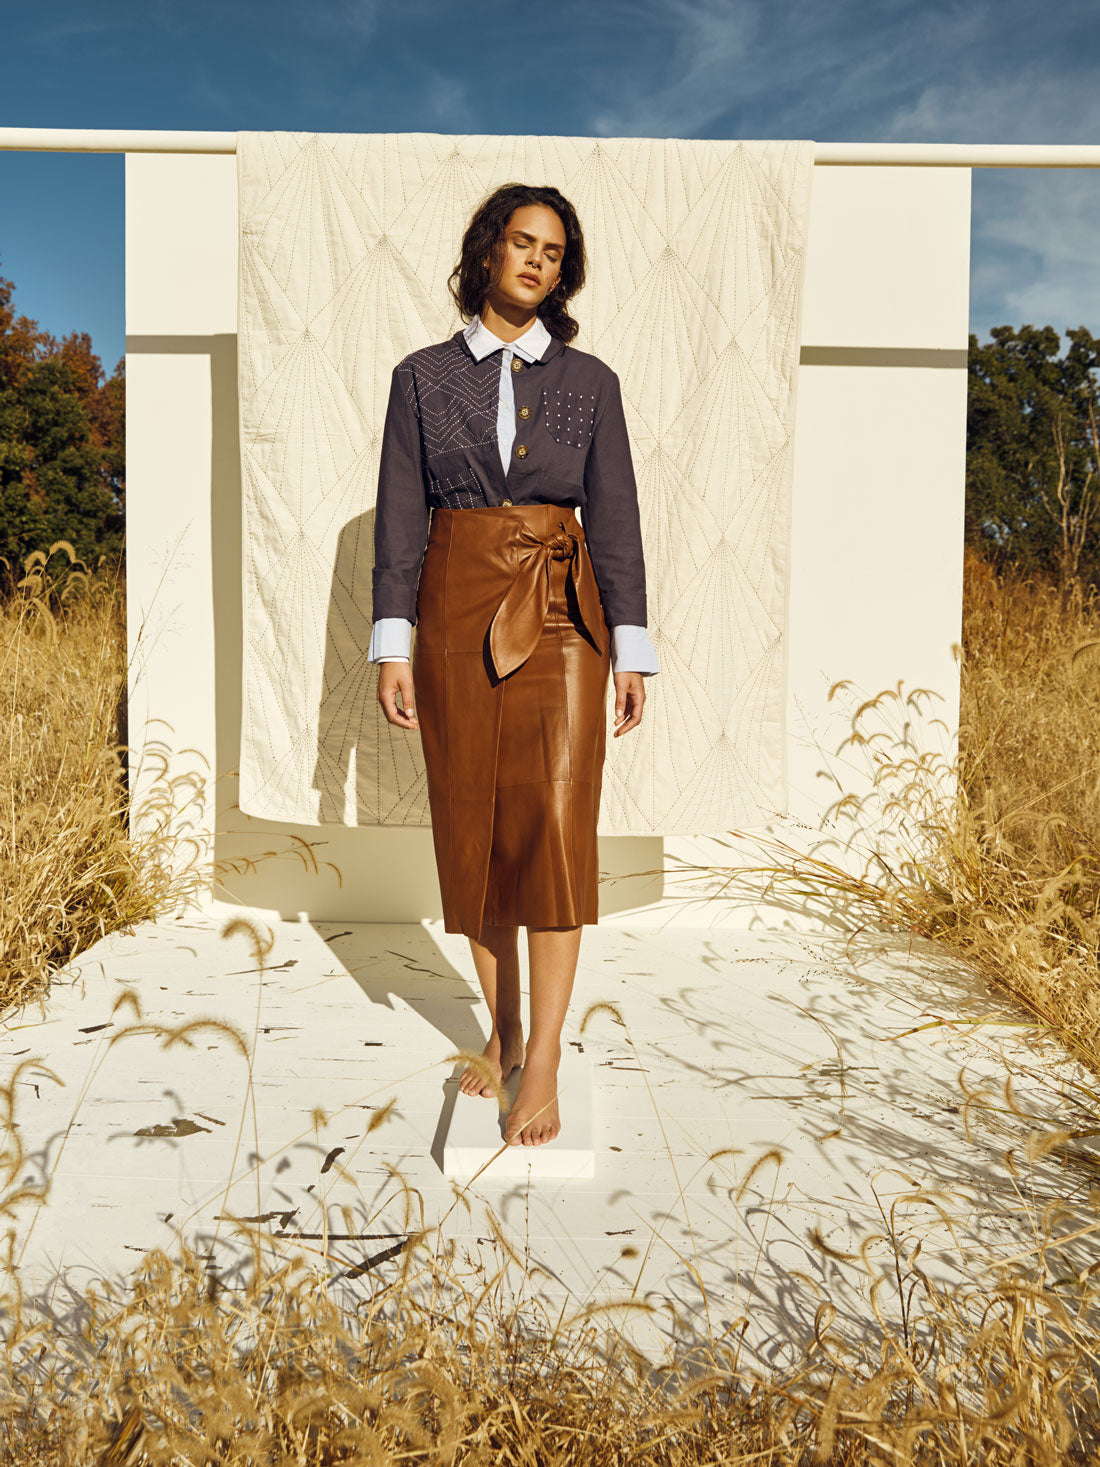 Anchal Navy Chore Jacket with Array Quilt in a Kentucky field, photographer Clay Cook